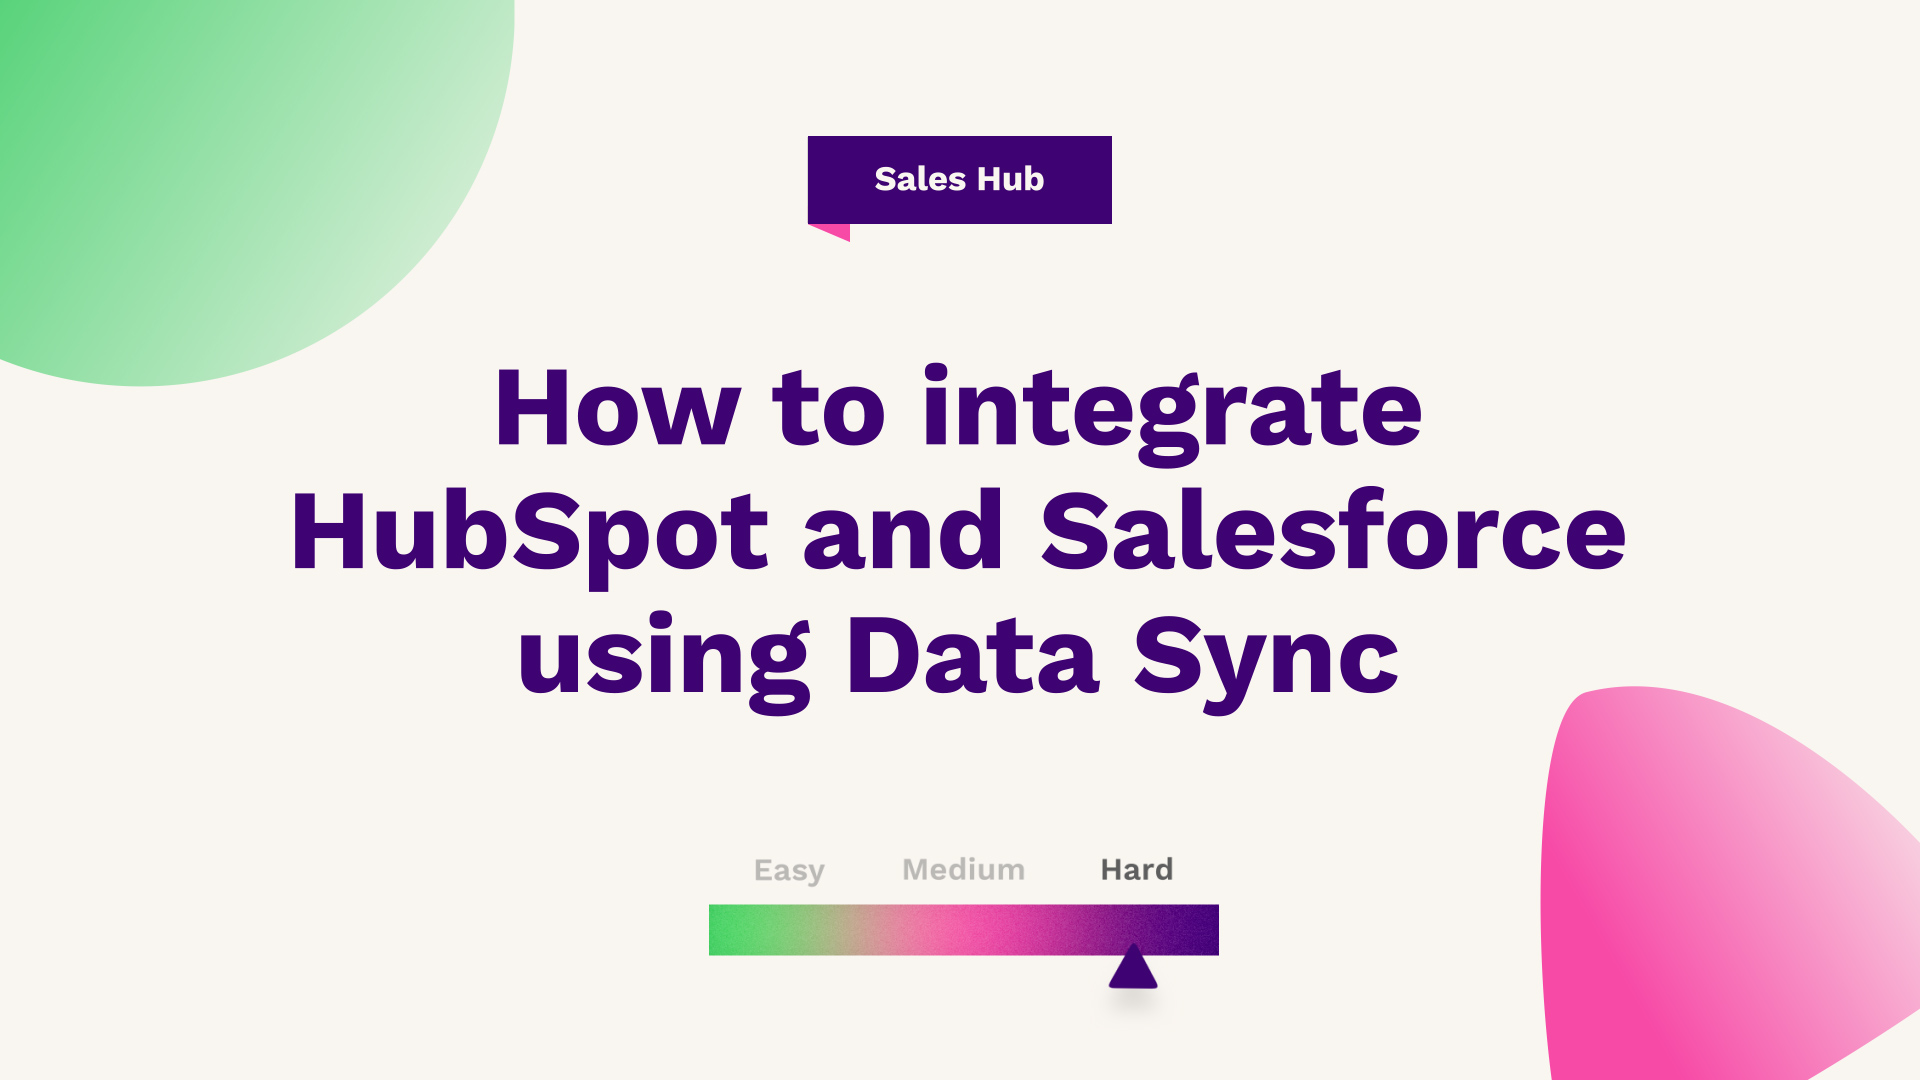 How to integrate HubSpot and Salesforce using Data Sync